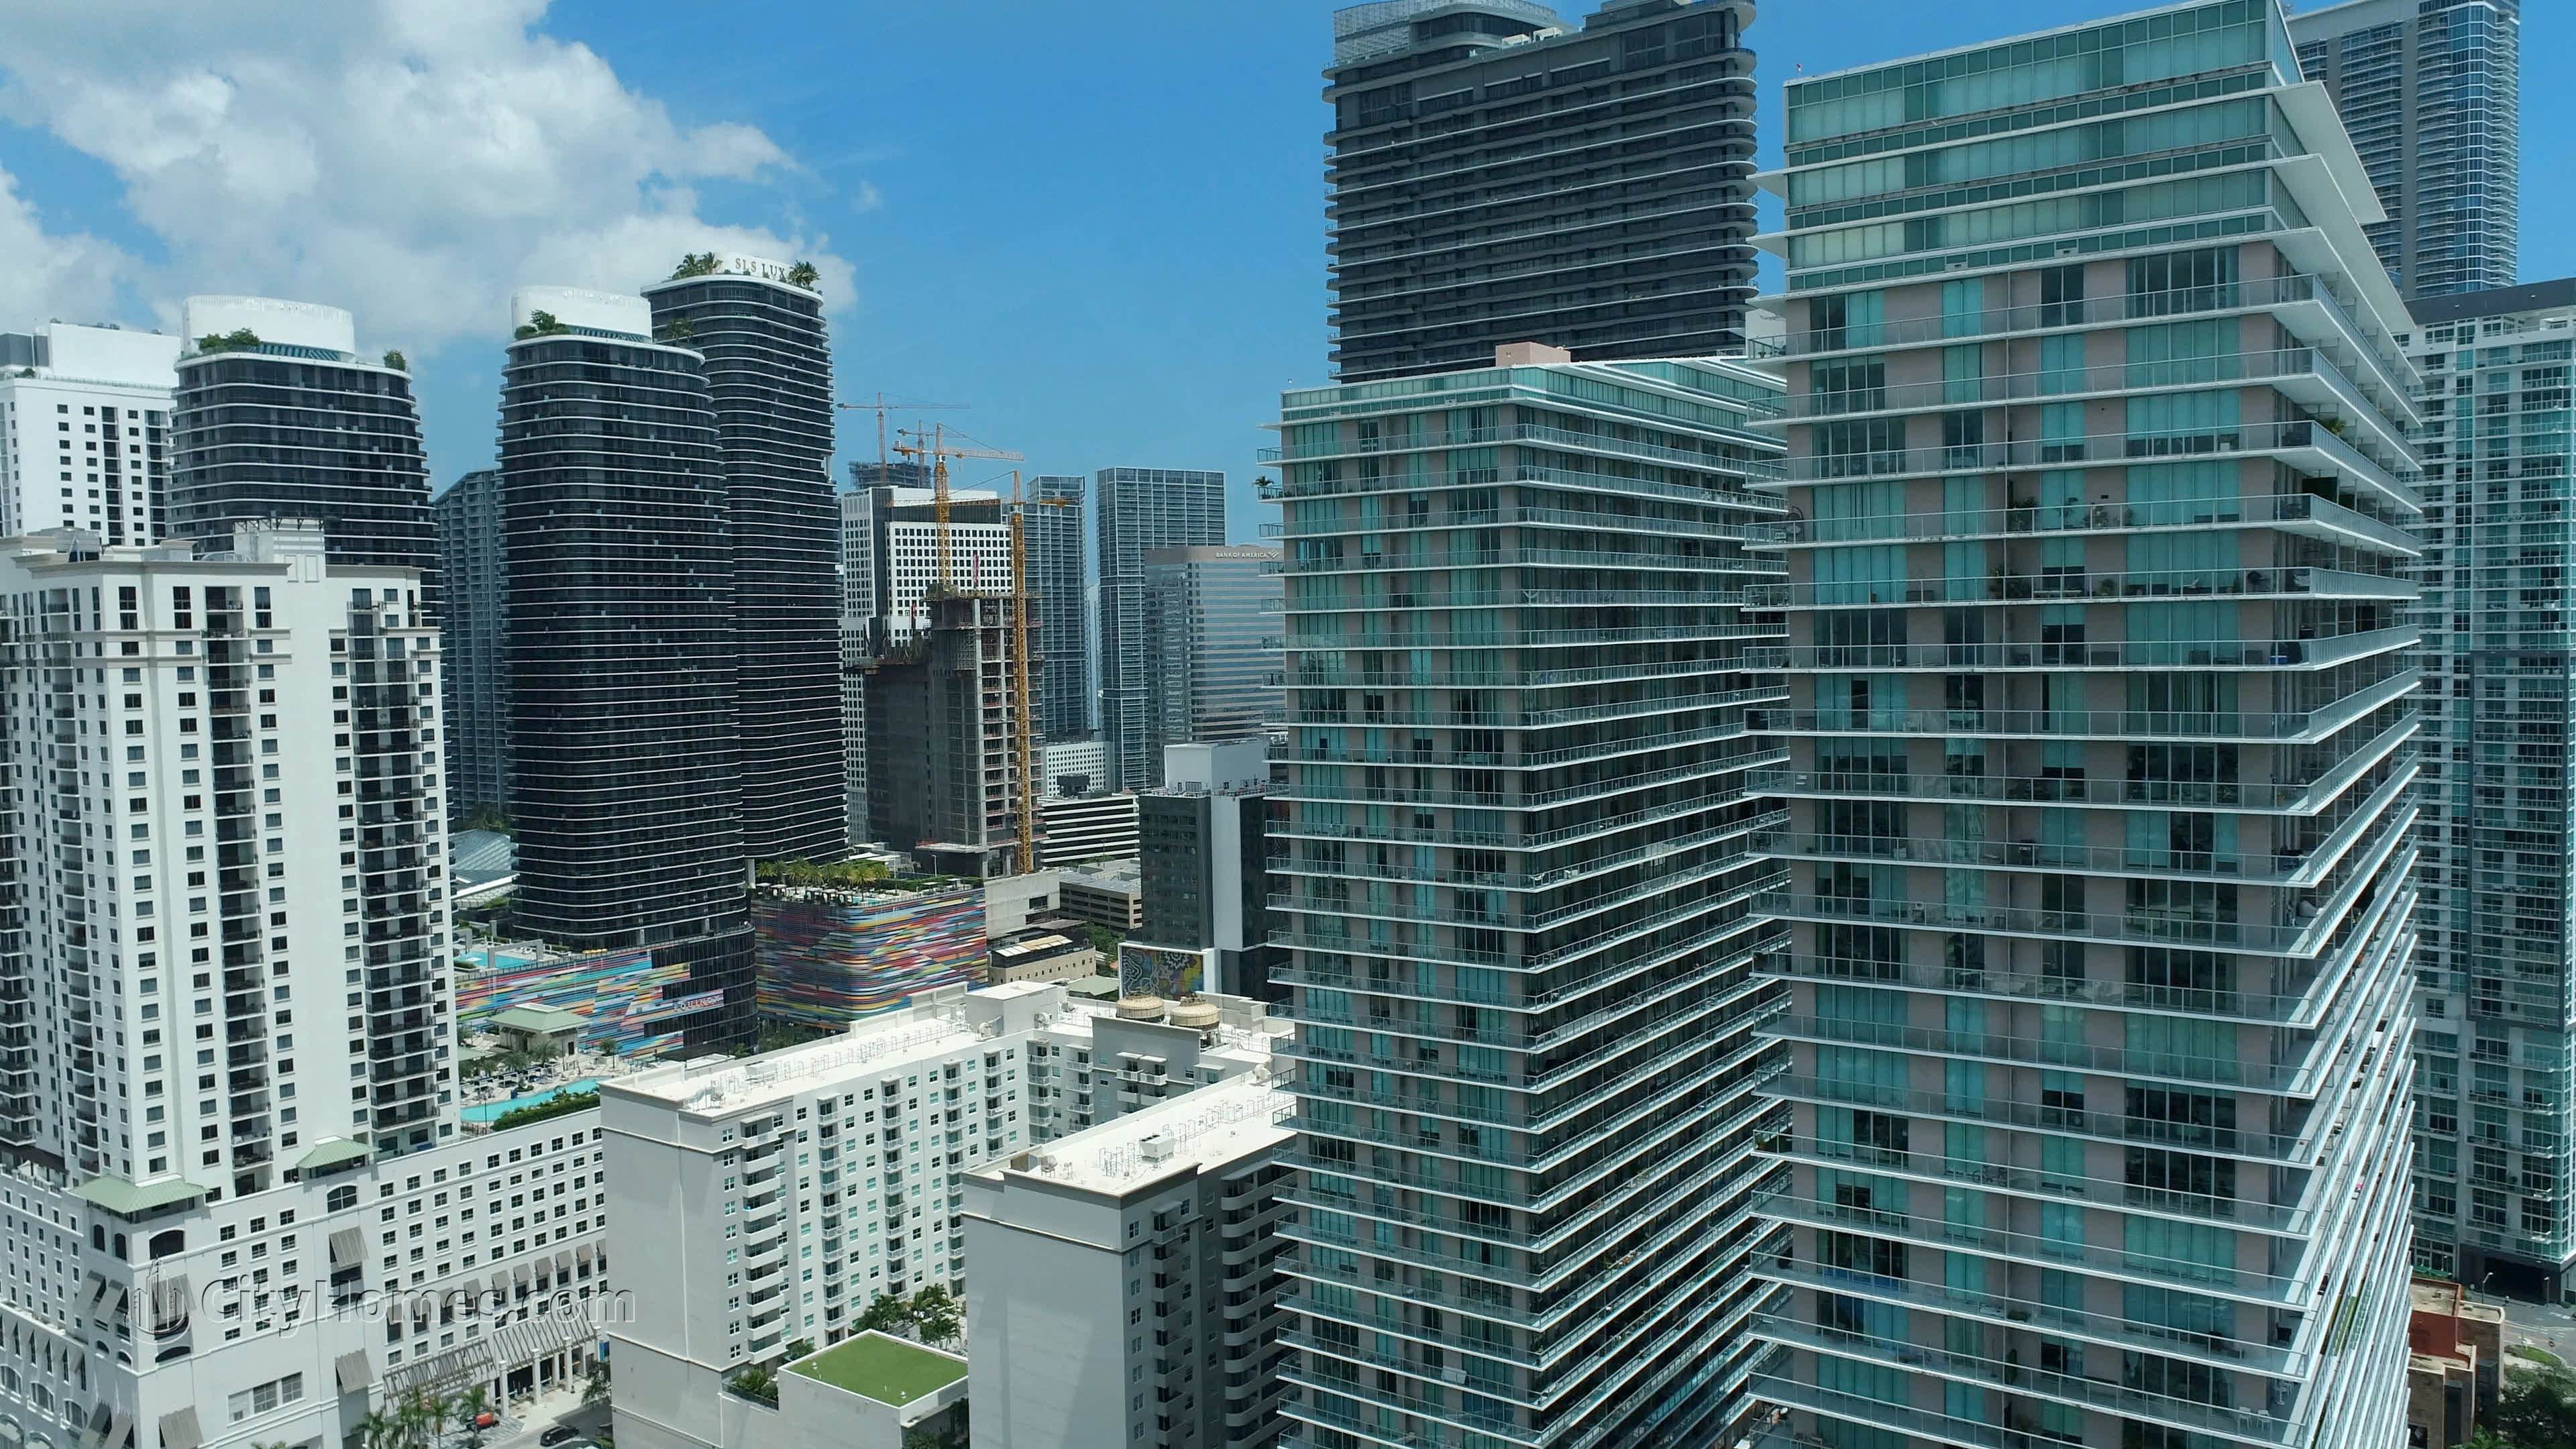 3. 79 SW 12th Street, Brickell, Miami, FL 33130에 Axis - South Tower 건물